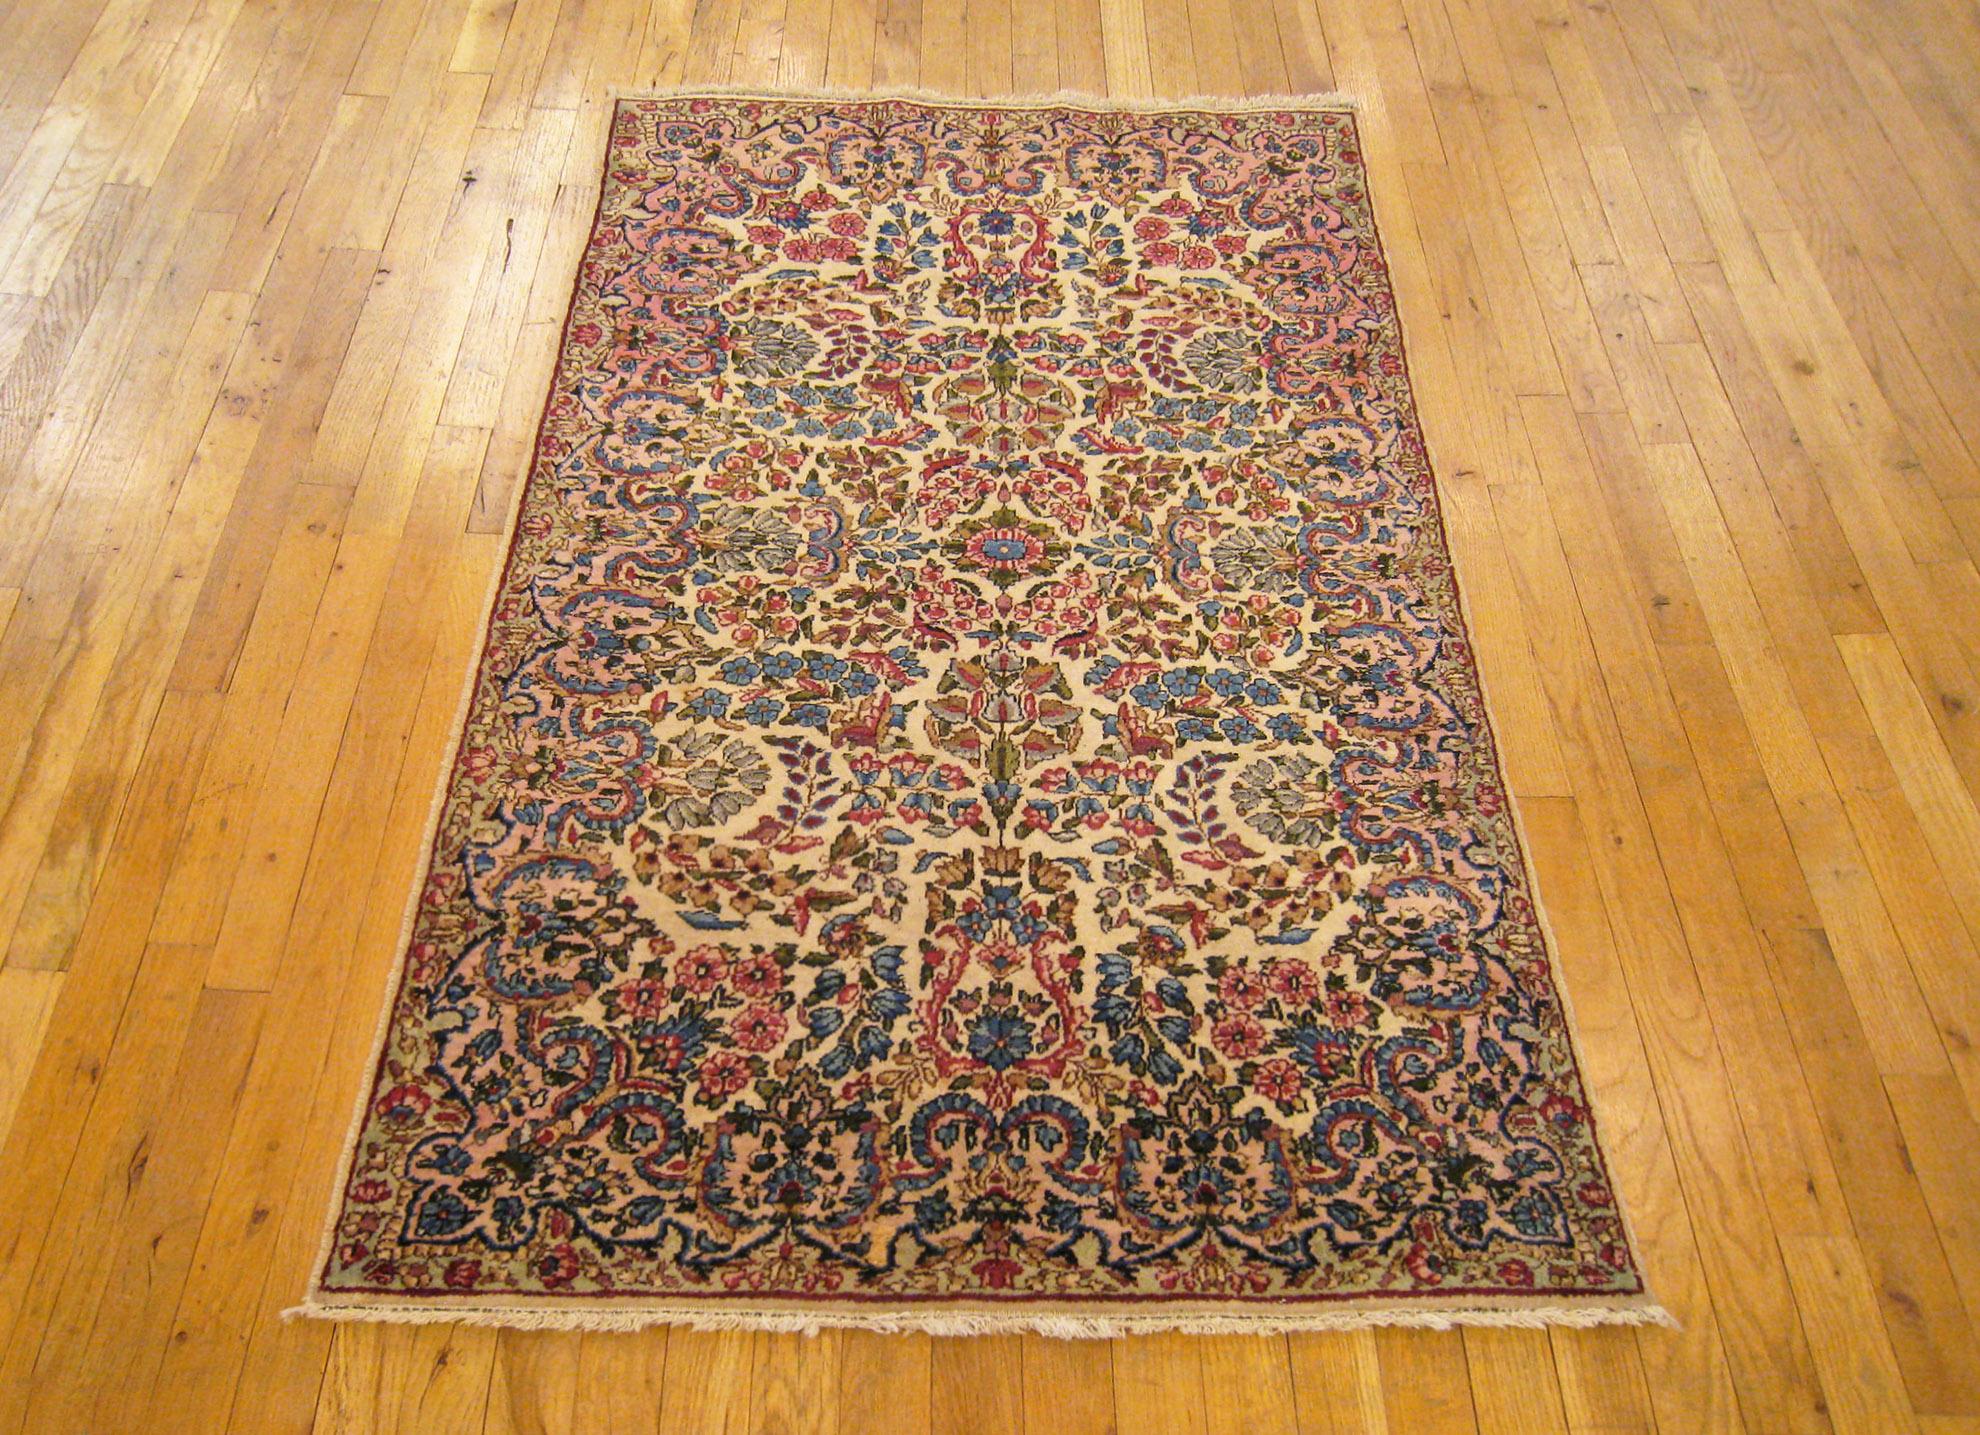 An antique Persian Kerman oriental rug, size 5' x 3', circa 1920. This delightful small carpet features an ivory central field covered with a variety of floral elements, which seamlessly blend into the light blue outer border. Hand-woven with wool,